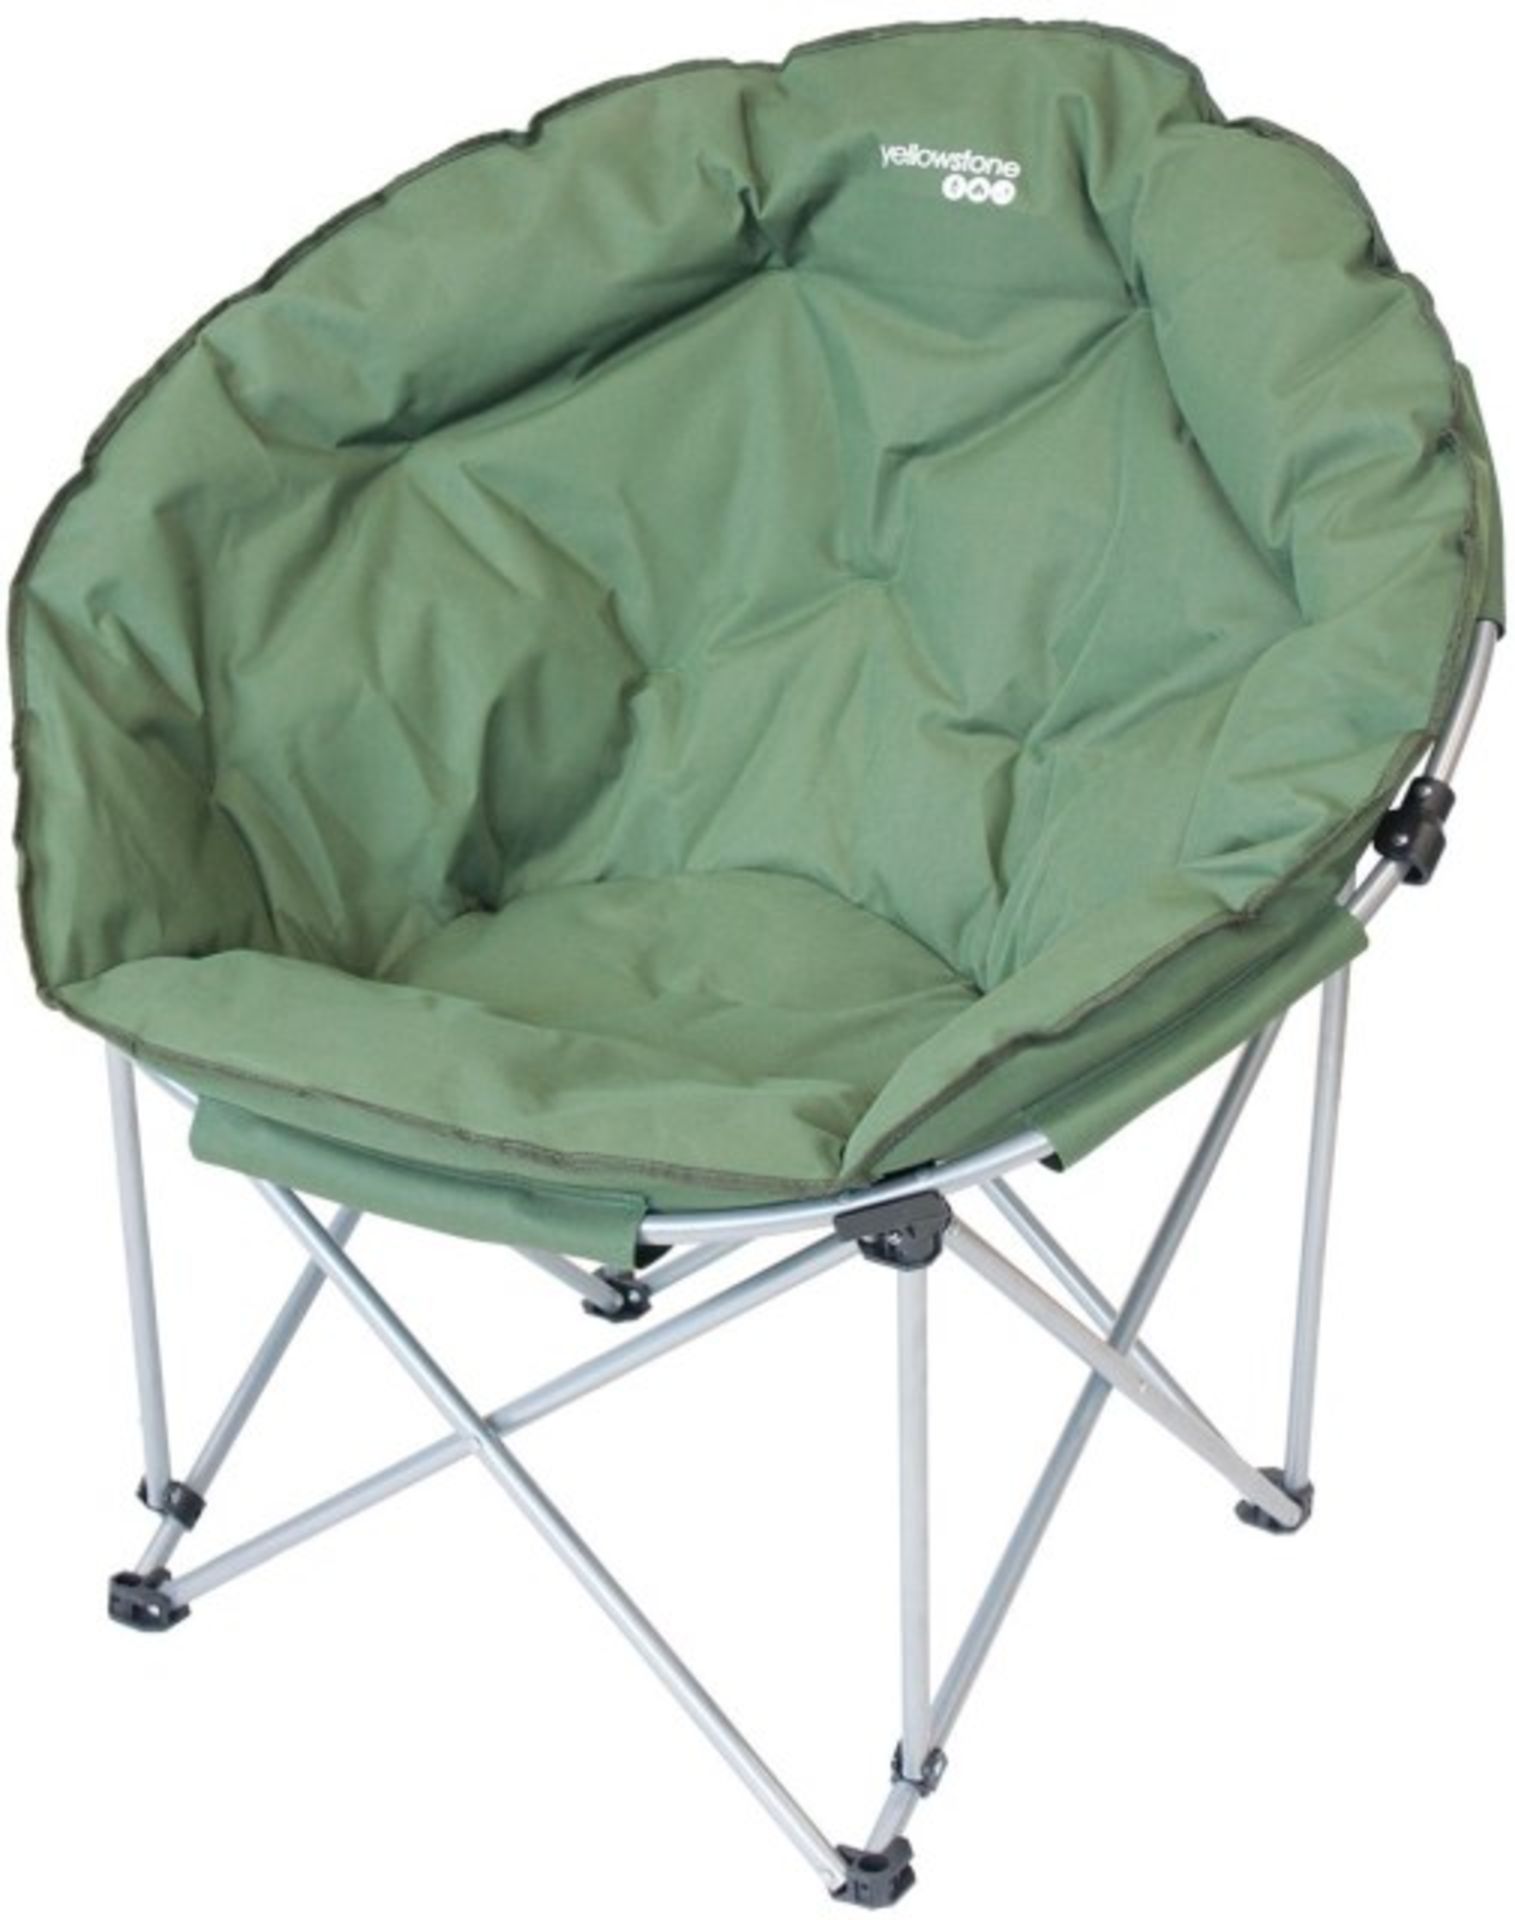 V Brand New Orbit Outdoor Green Leisure Chair RRP £34.99